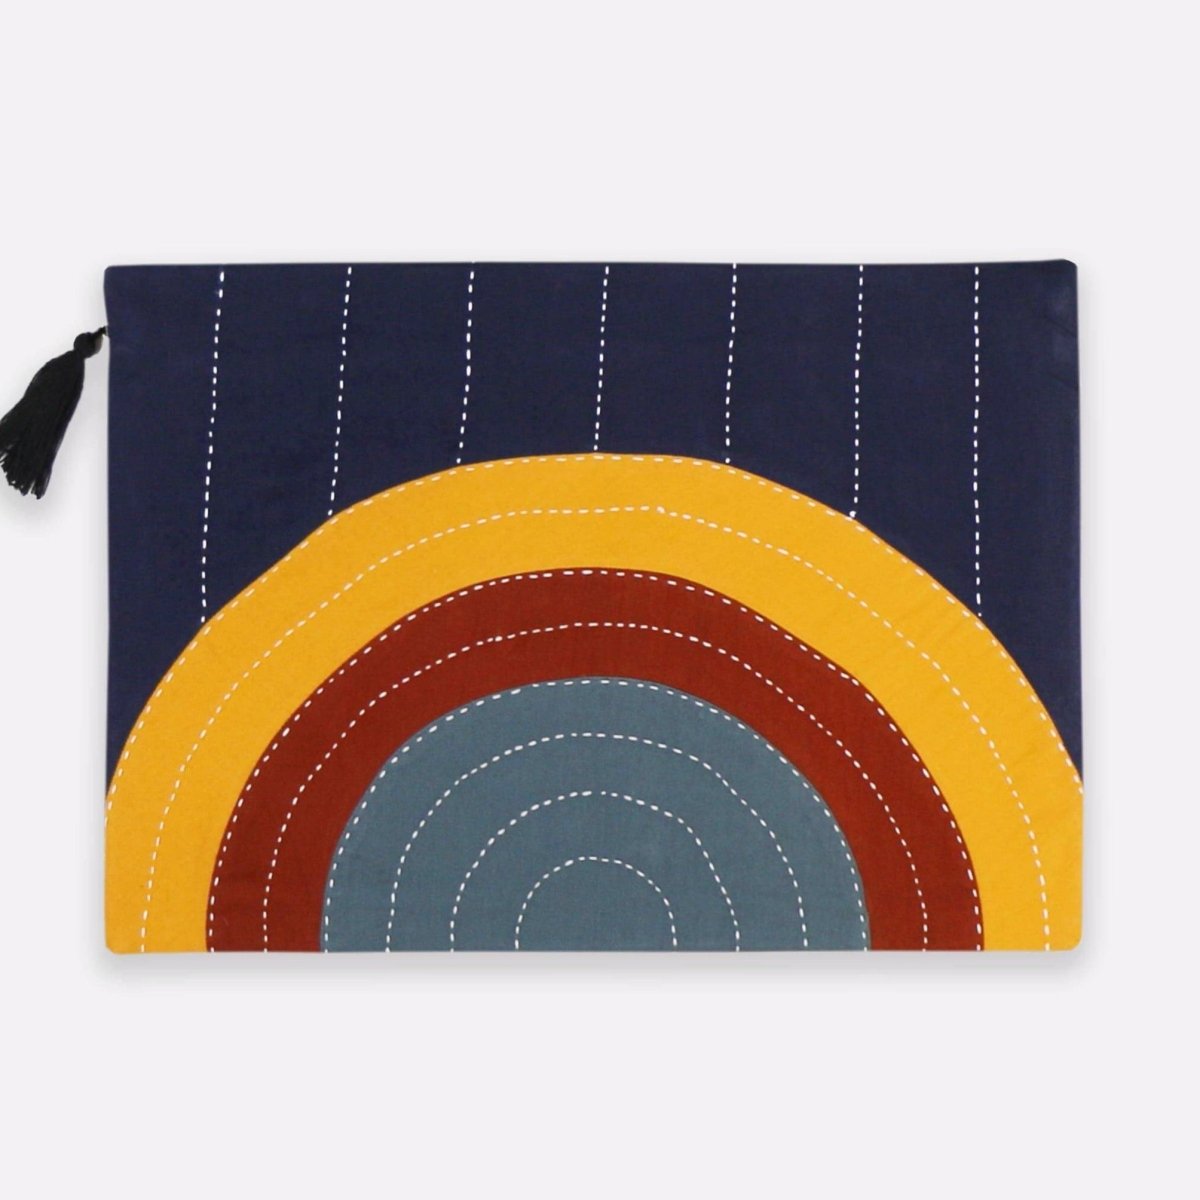 Back side of oversized square pouch with a cross-stitched concentric pattern in various colors. Includes zipper with a black tassel. Designed by Anchal in Louisville, Kentucky and handmade in Ajmer, India.